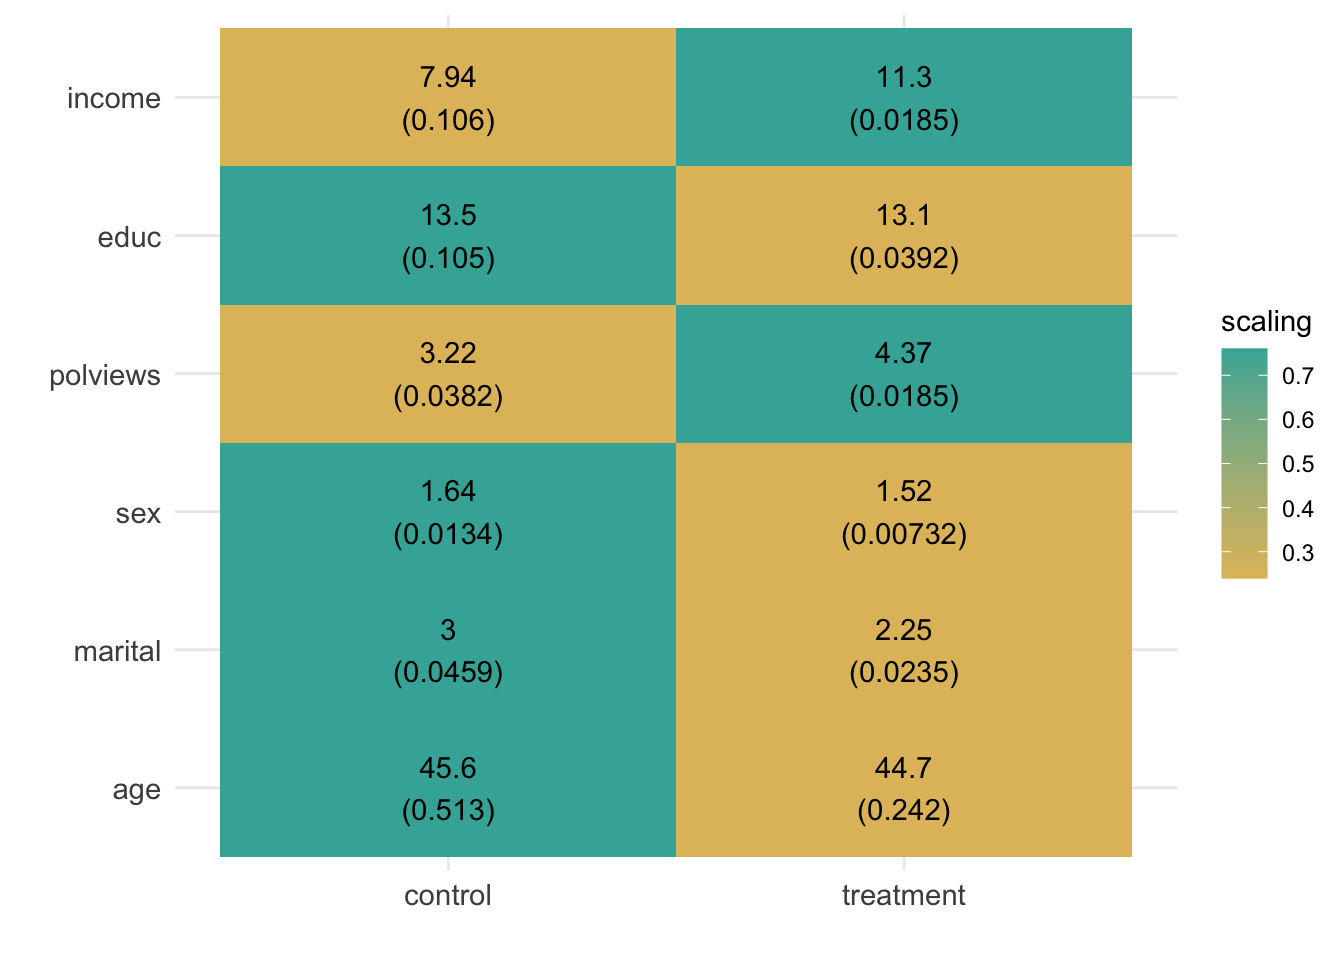 Average covariate values within each group (defined by treatment assignment under the learned policy)